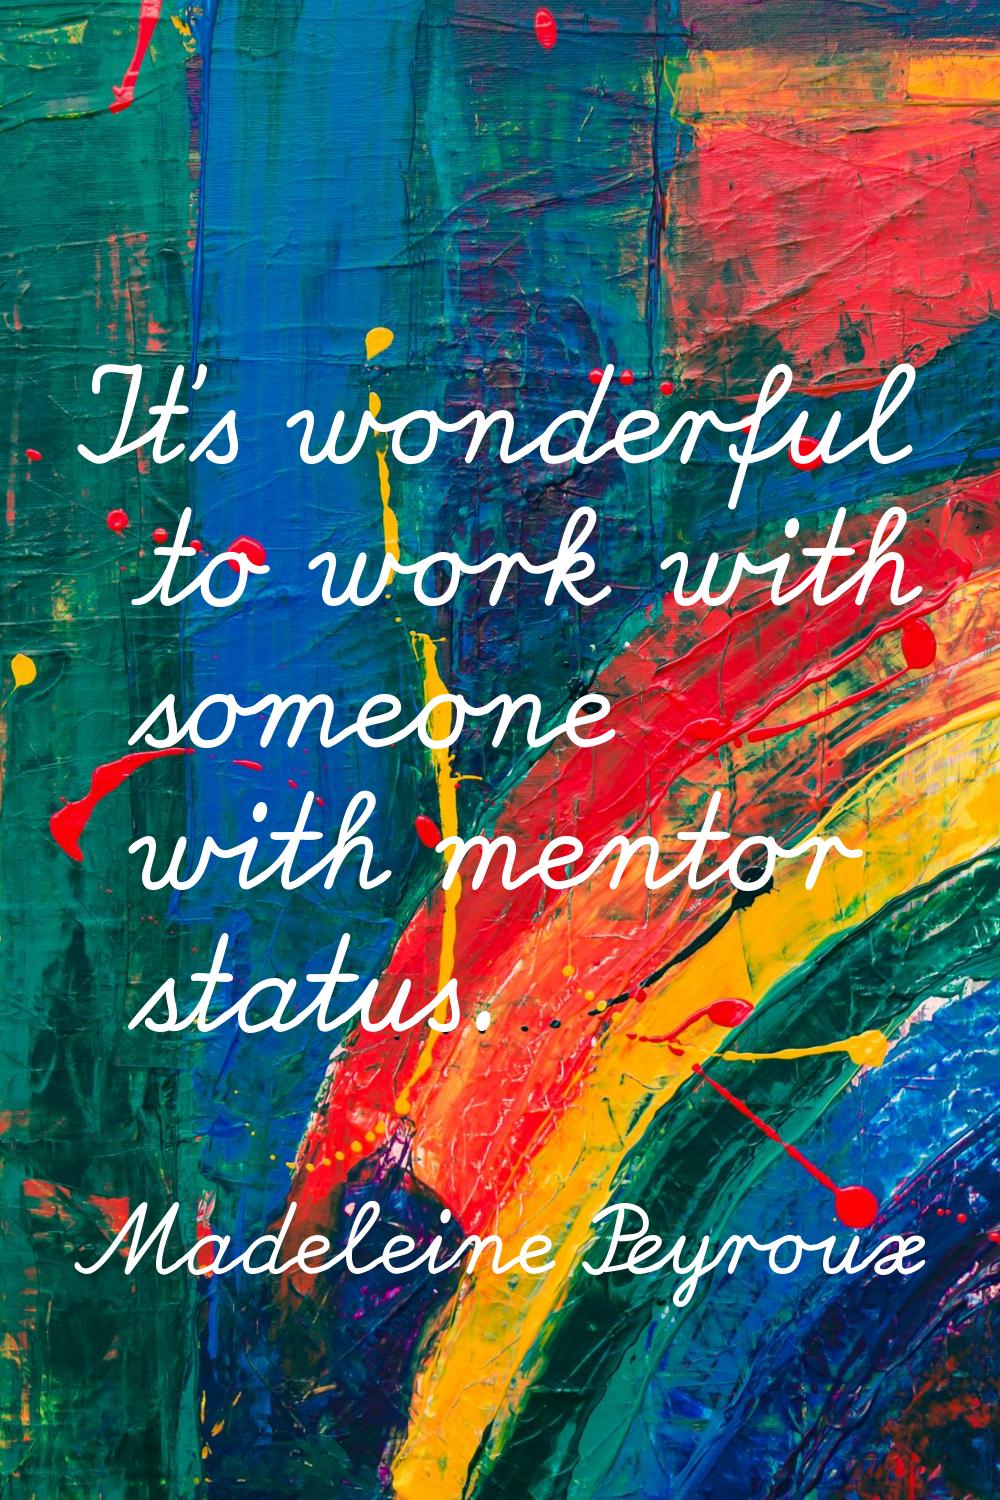 It's wonderful to work with someone with mentor status.